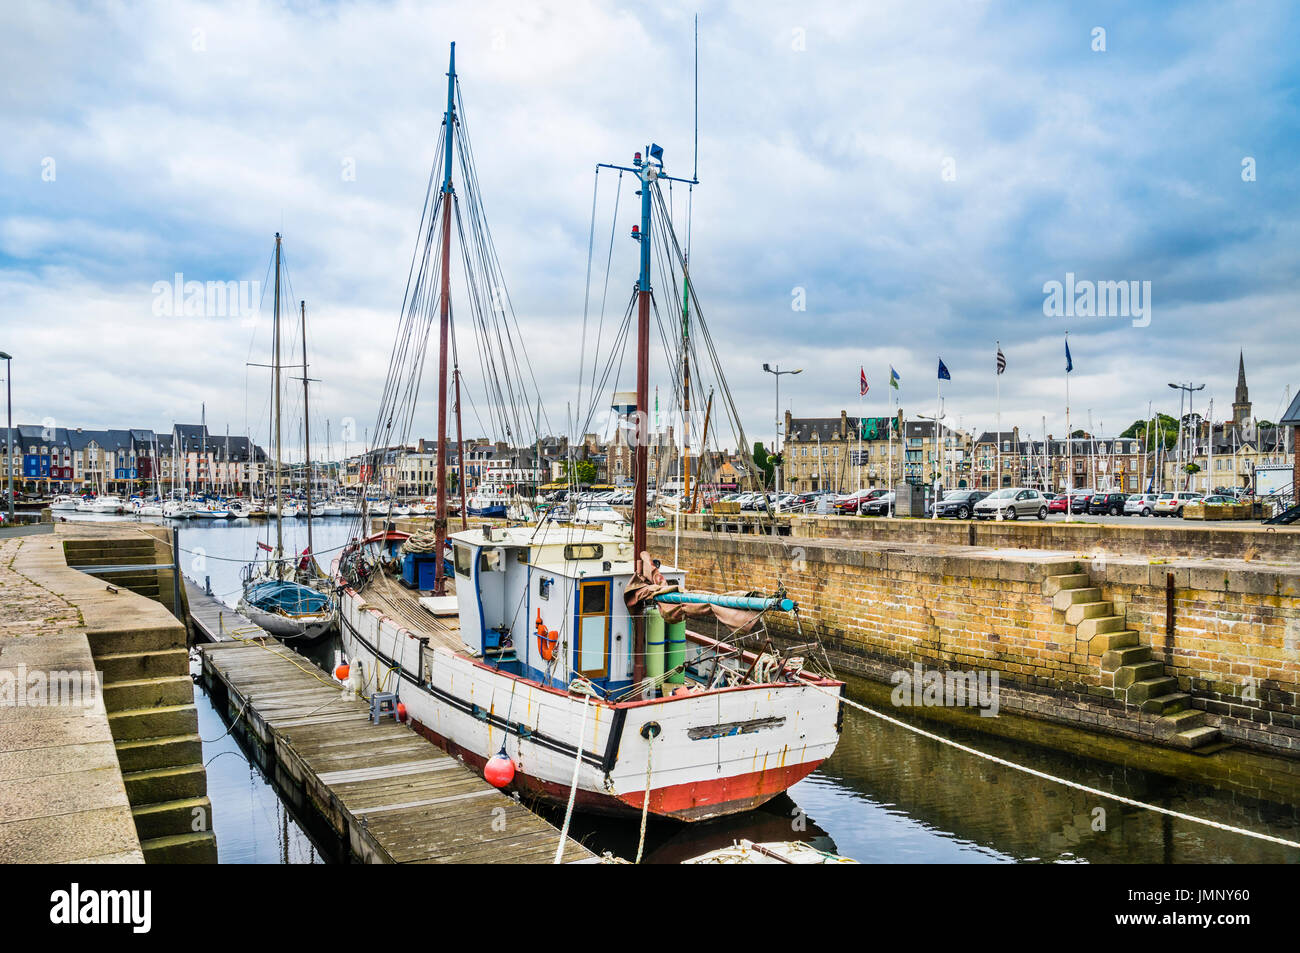 France, Brittany, Paimpol, fishing vessel in the Port of Paimpol Stock Photo